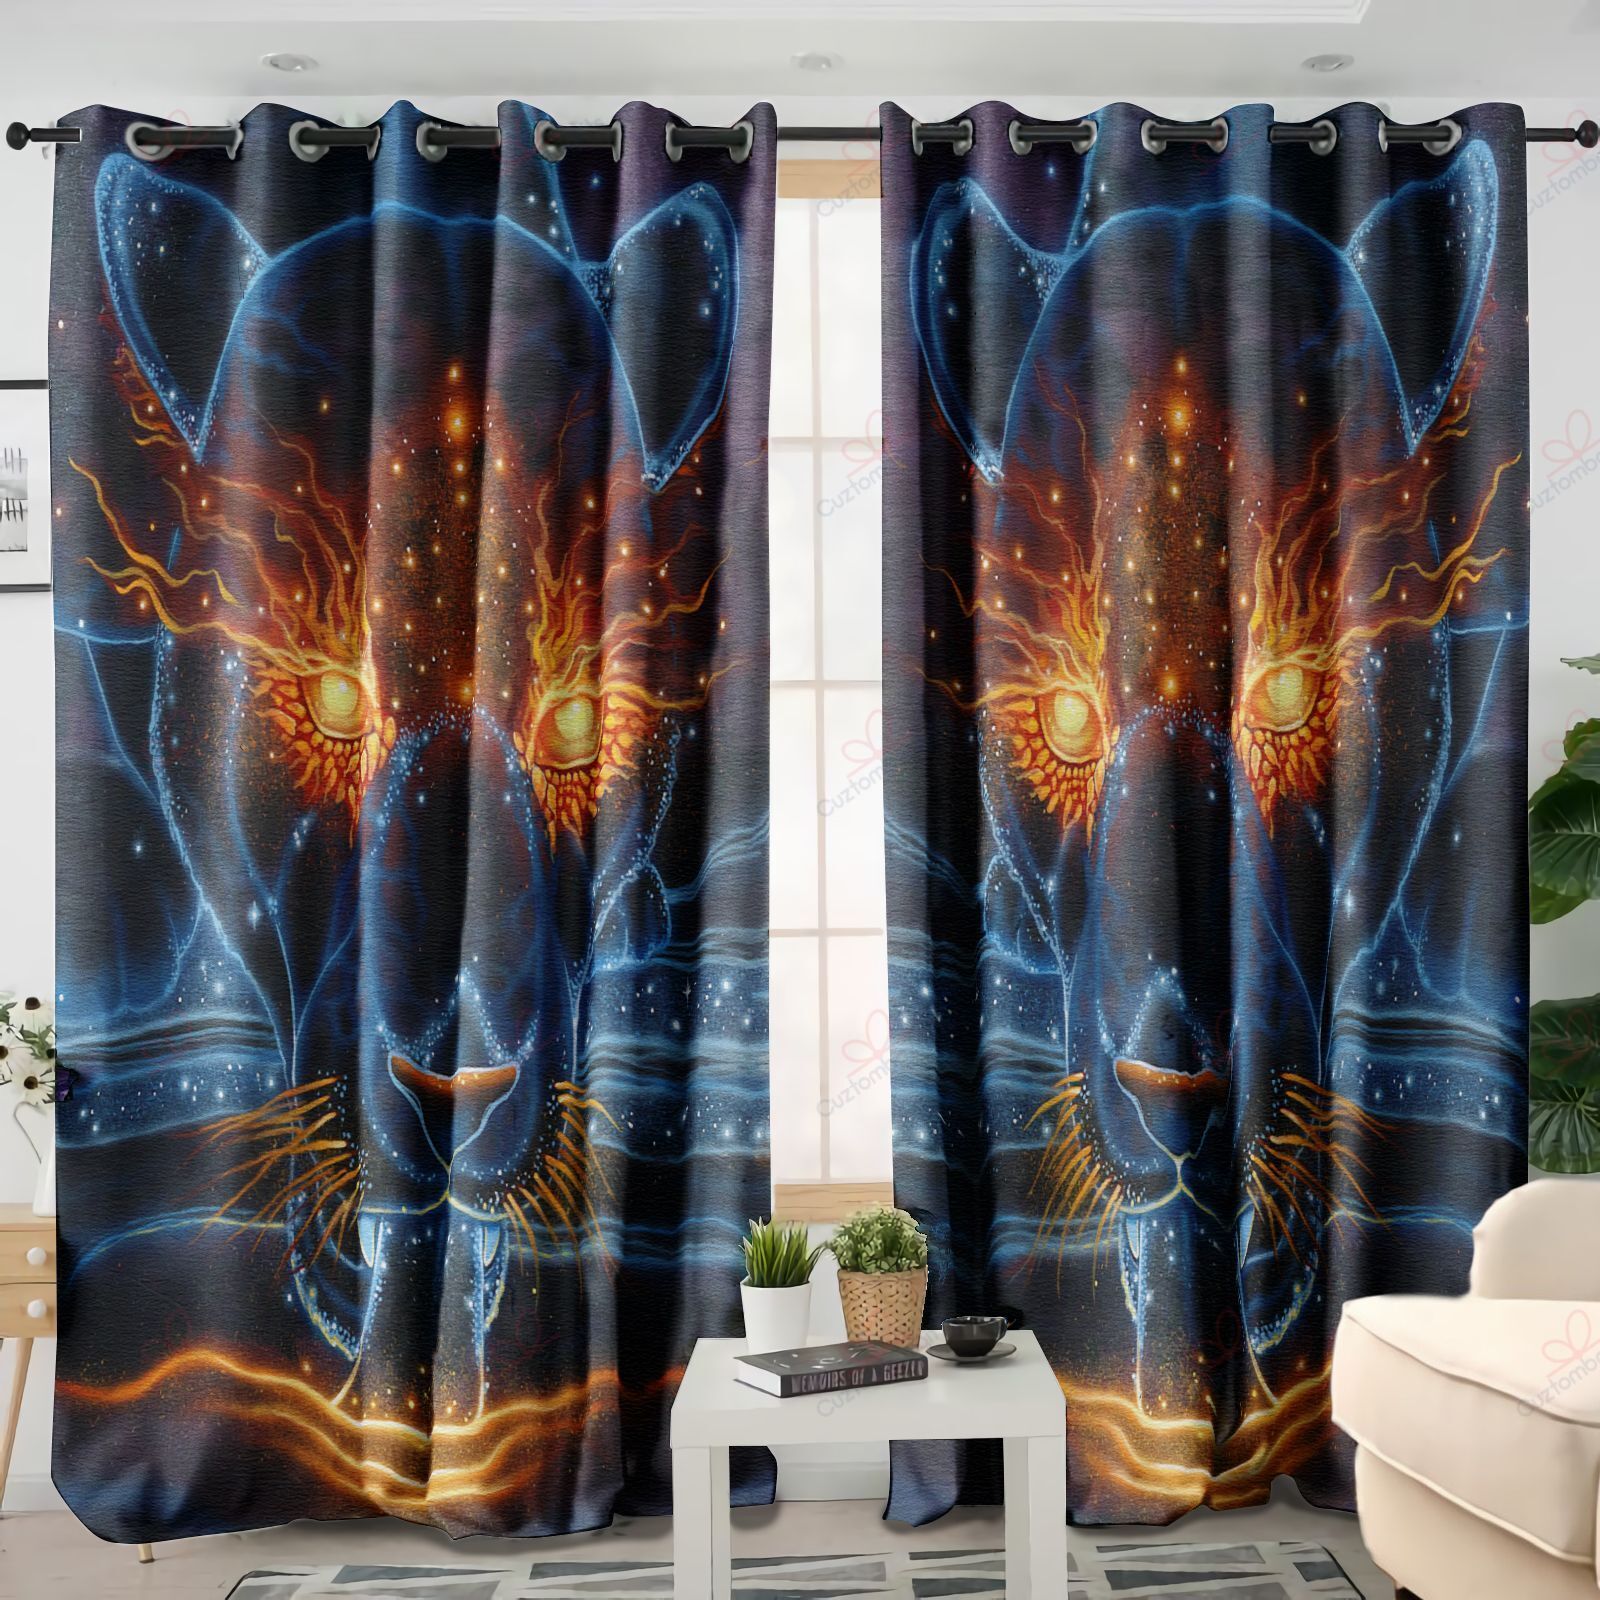 Panther Galaxy Printed Window Curtain Home Decor